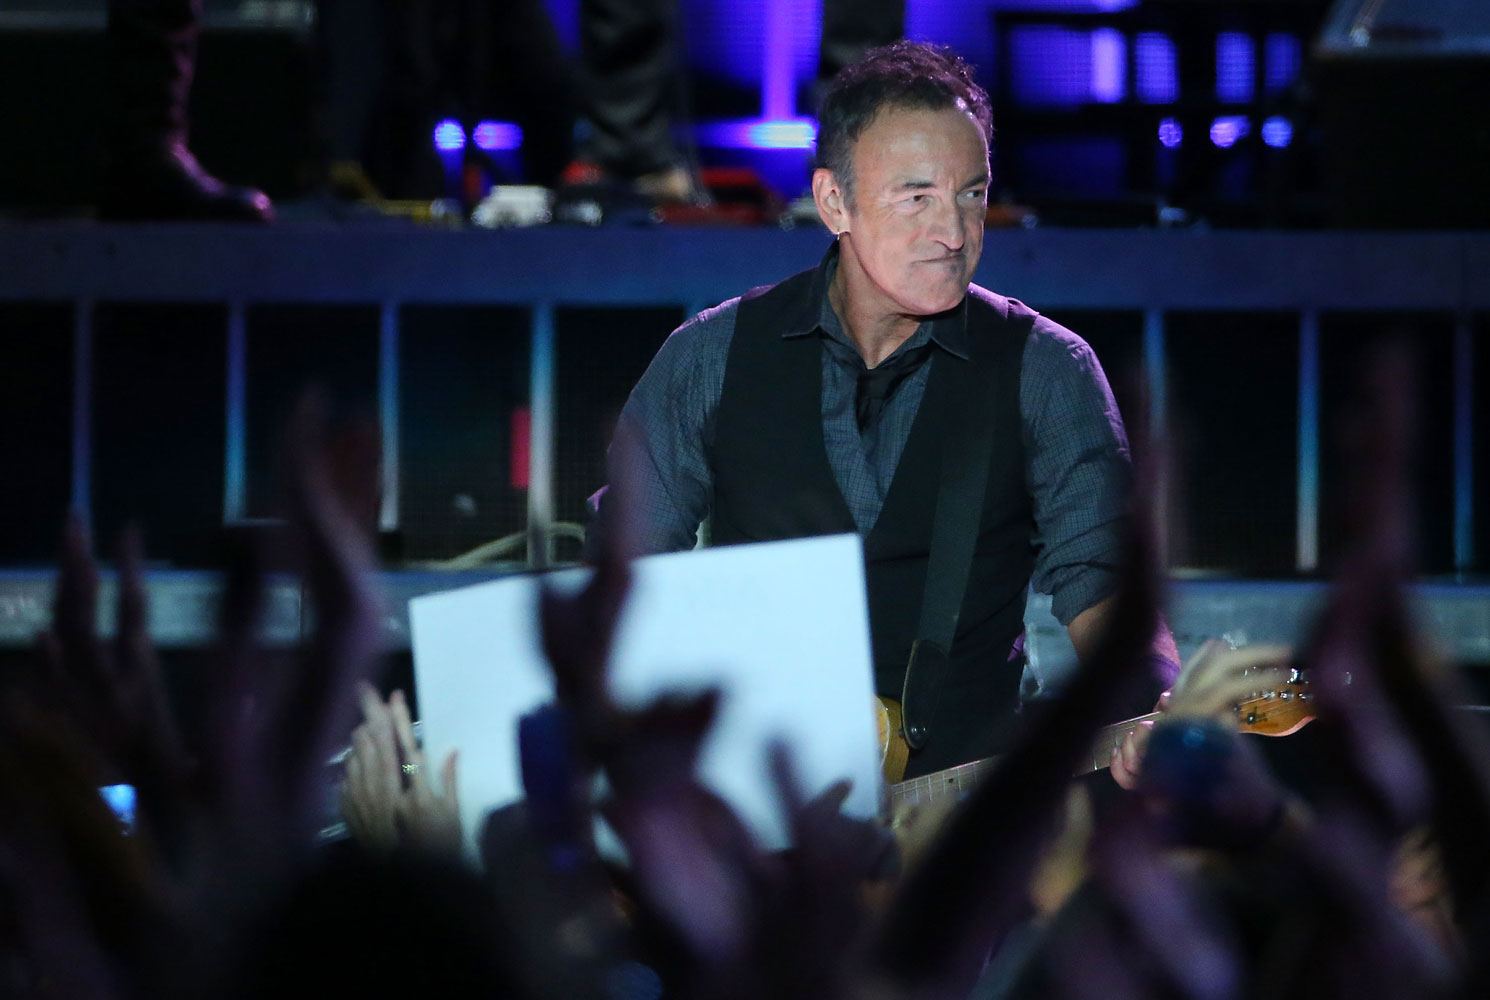 Bruce Springsteen perfomrs live on stange with the E Street Band on March 1, 2014 in Auckland, New Zealand. (Fiona Goodall&mdash;Getty Images)